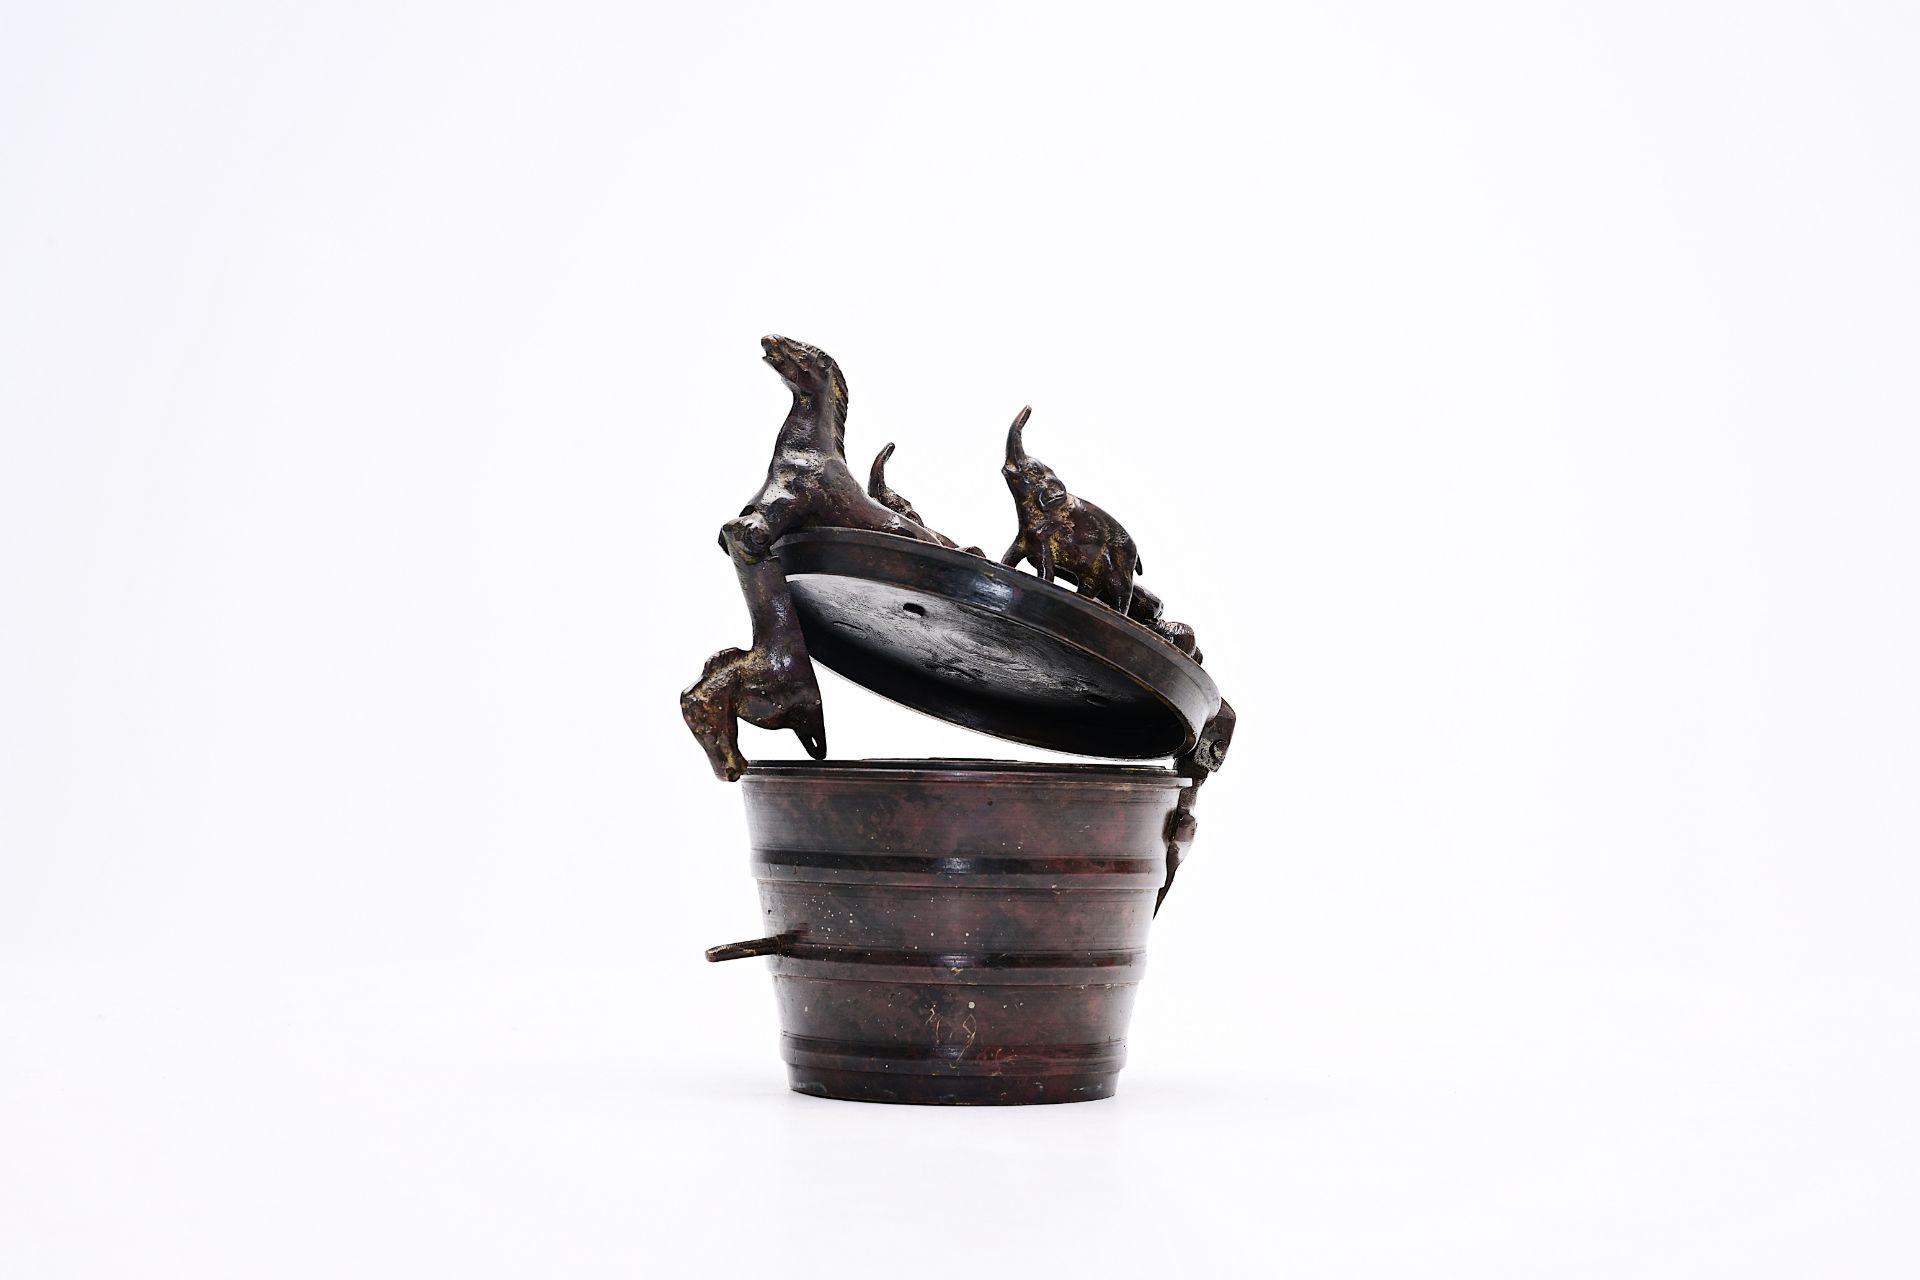 A set of bronze probably Portuguese colonial Nuremberg style nesting weights, ca. 1900 - Image 11 of 13